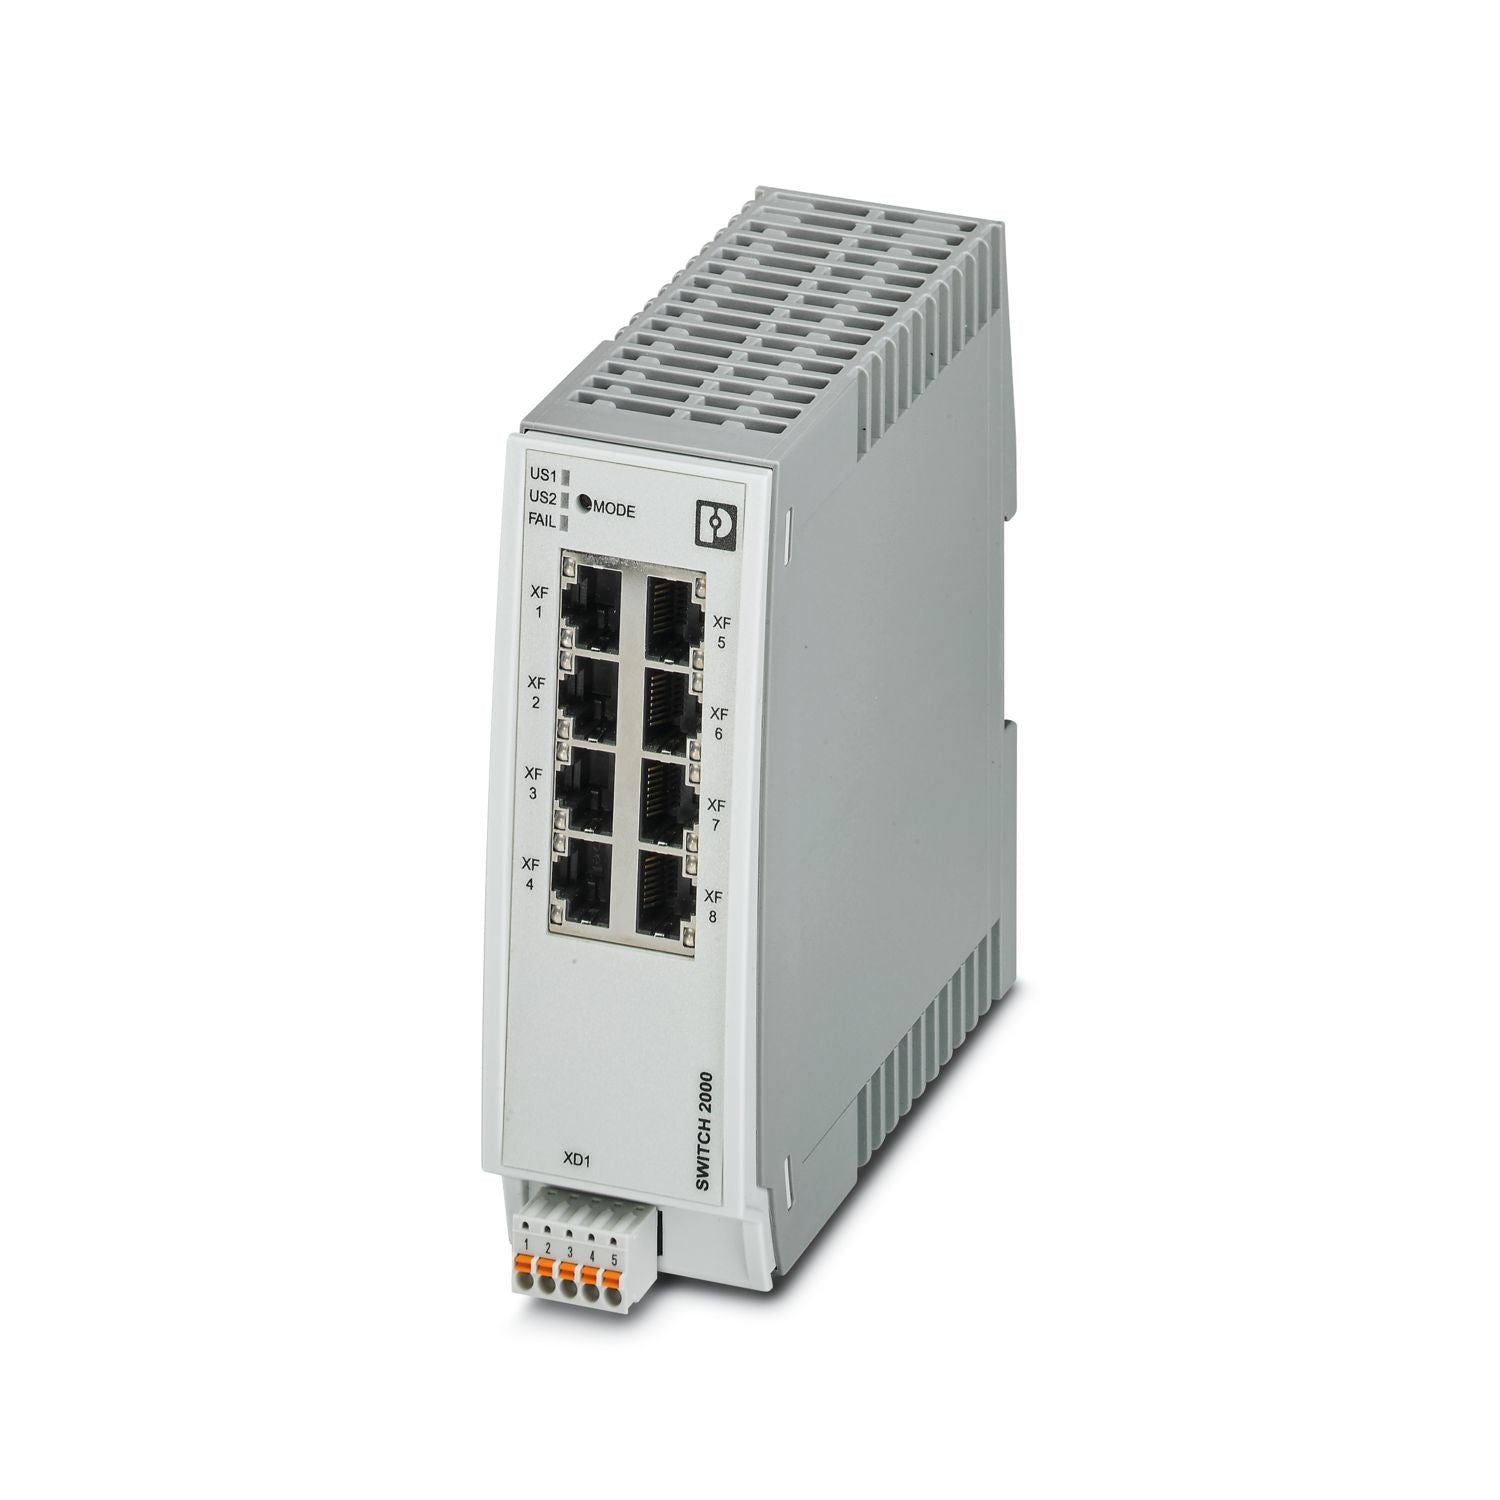 2702327 | Phoenix Contact Ethernet Switch, Managed, 8 Port, 10/100Mbps, Wide Temp, FL Switch 2000 Series